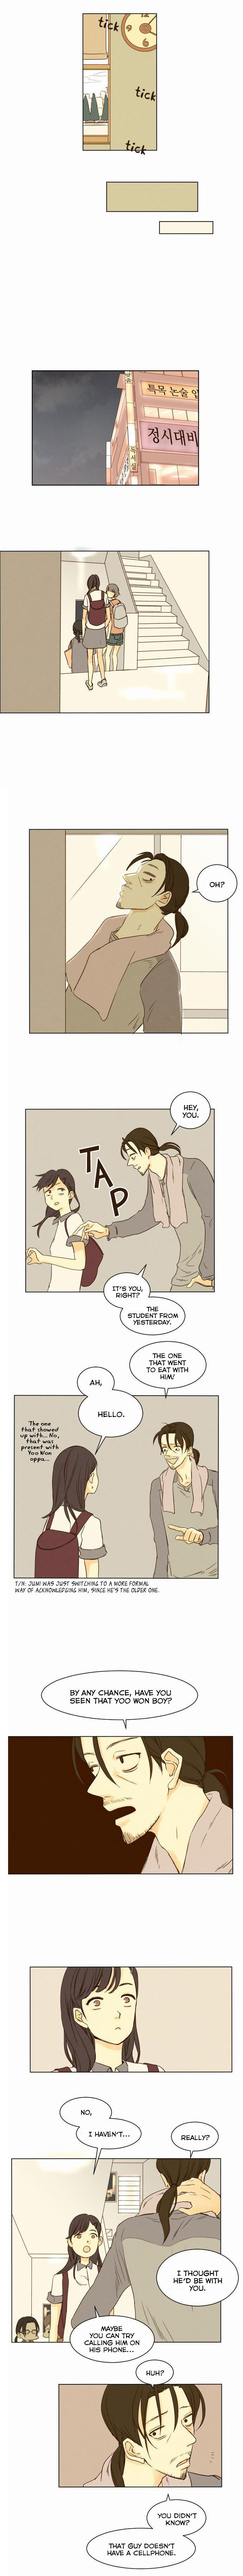 That Summer (KIM Hyun) Chapter 006 page 8